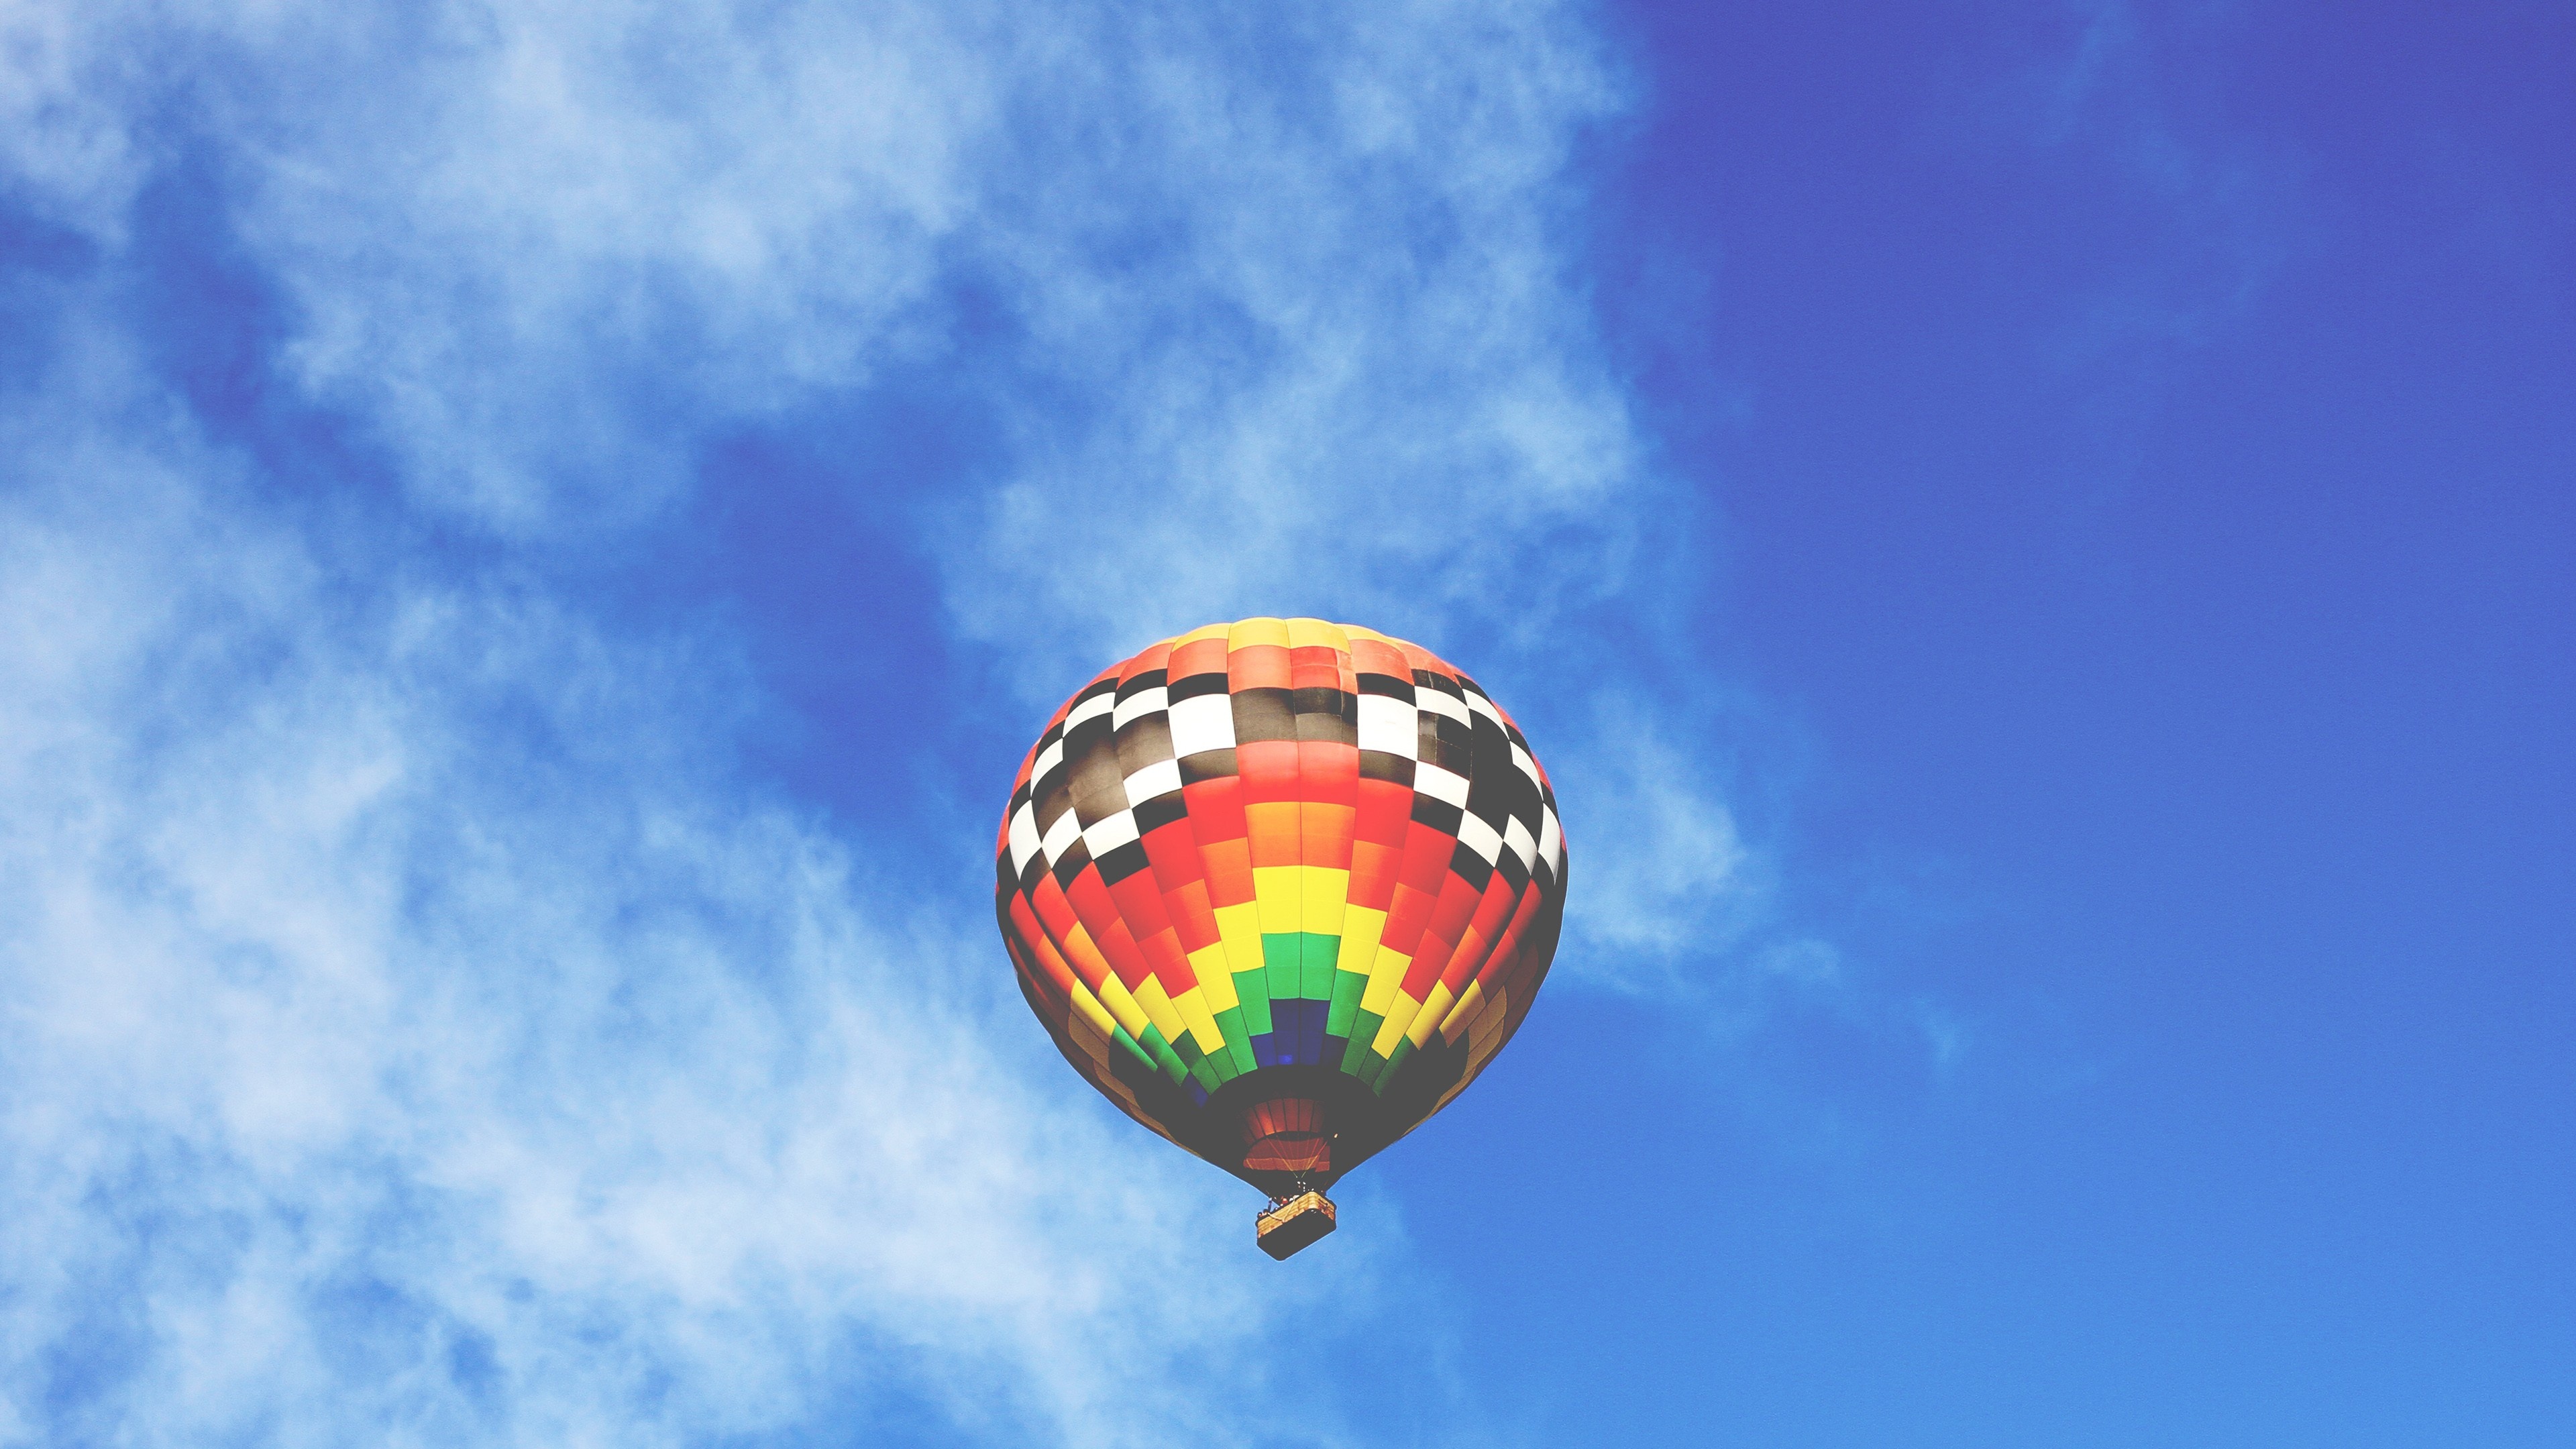 Hot Air Balloon: Cumulus, The Safest Of All Extreme Sports, Air Traveling. 3840x2160 4K Wallpaper.